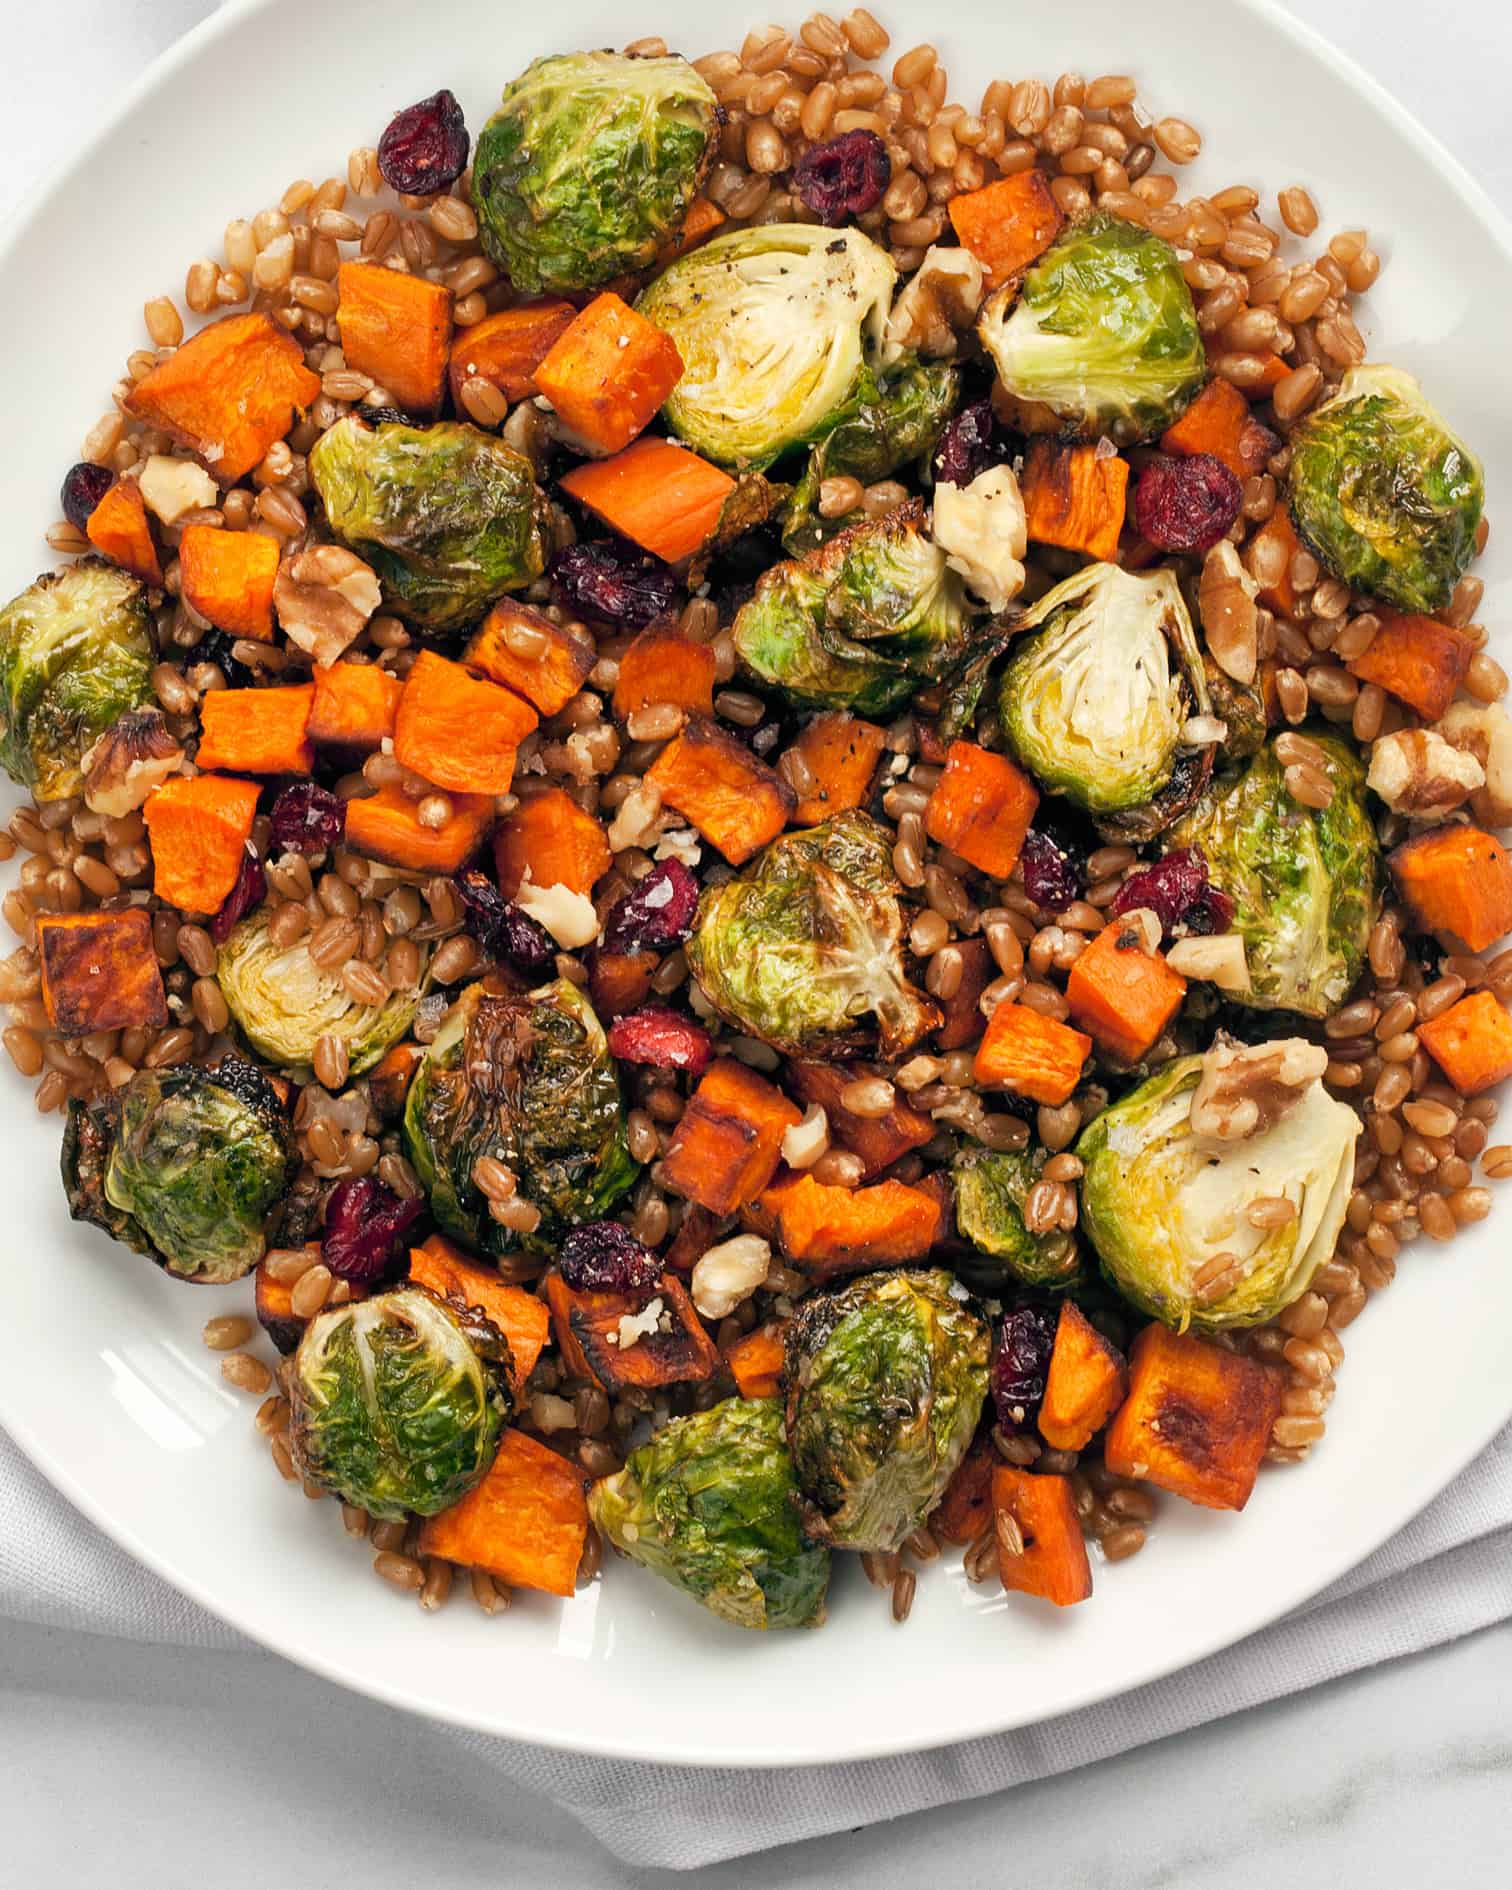 Wheat Berry Salad with Brussels Sprouts & Sweet Potatoes - Last Ingredient